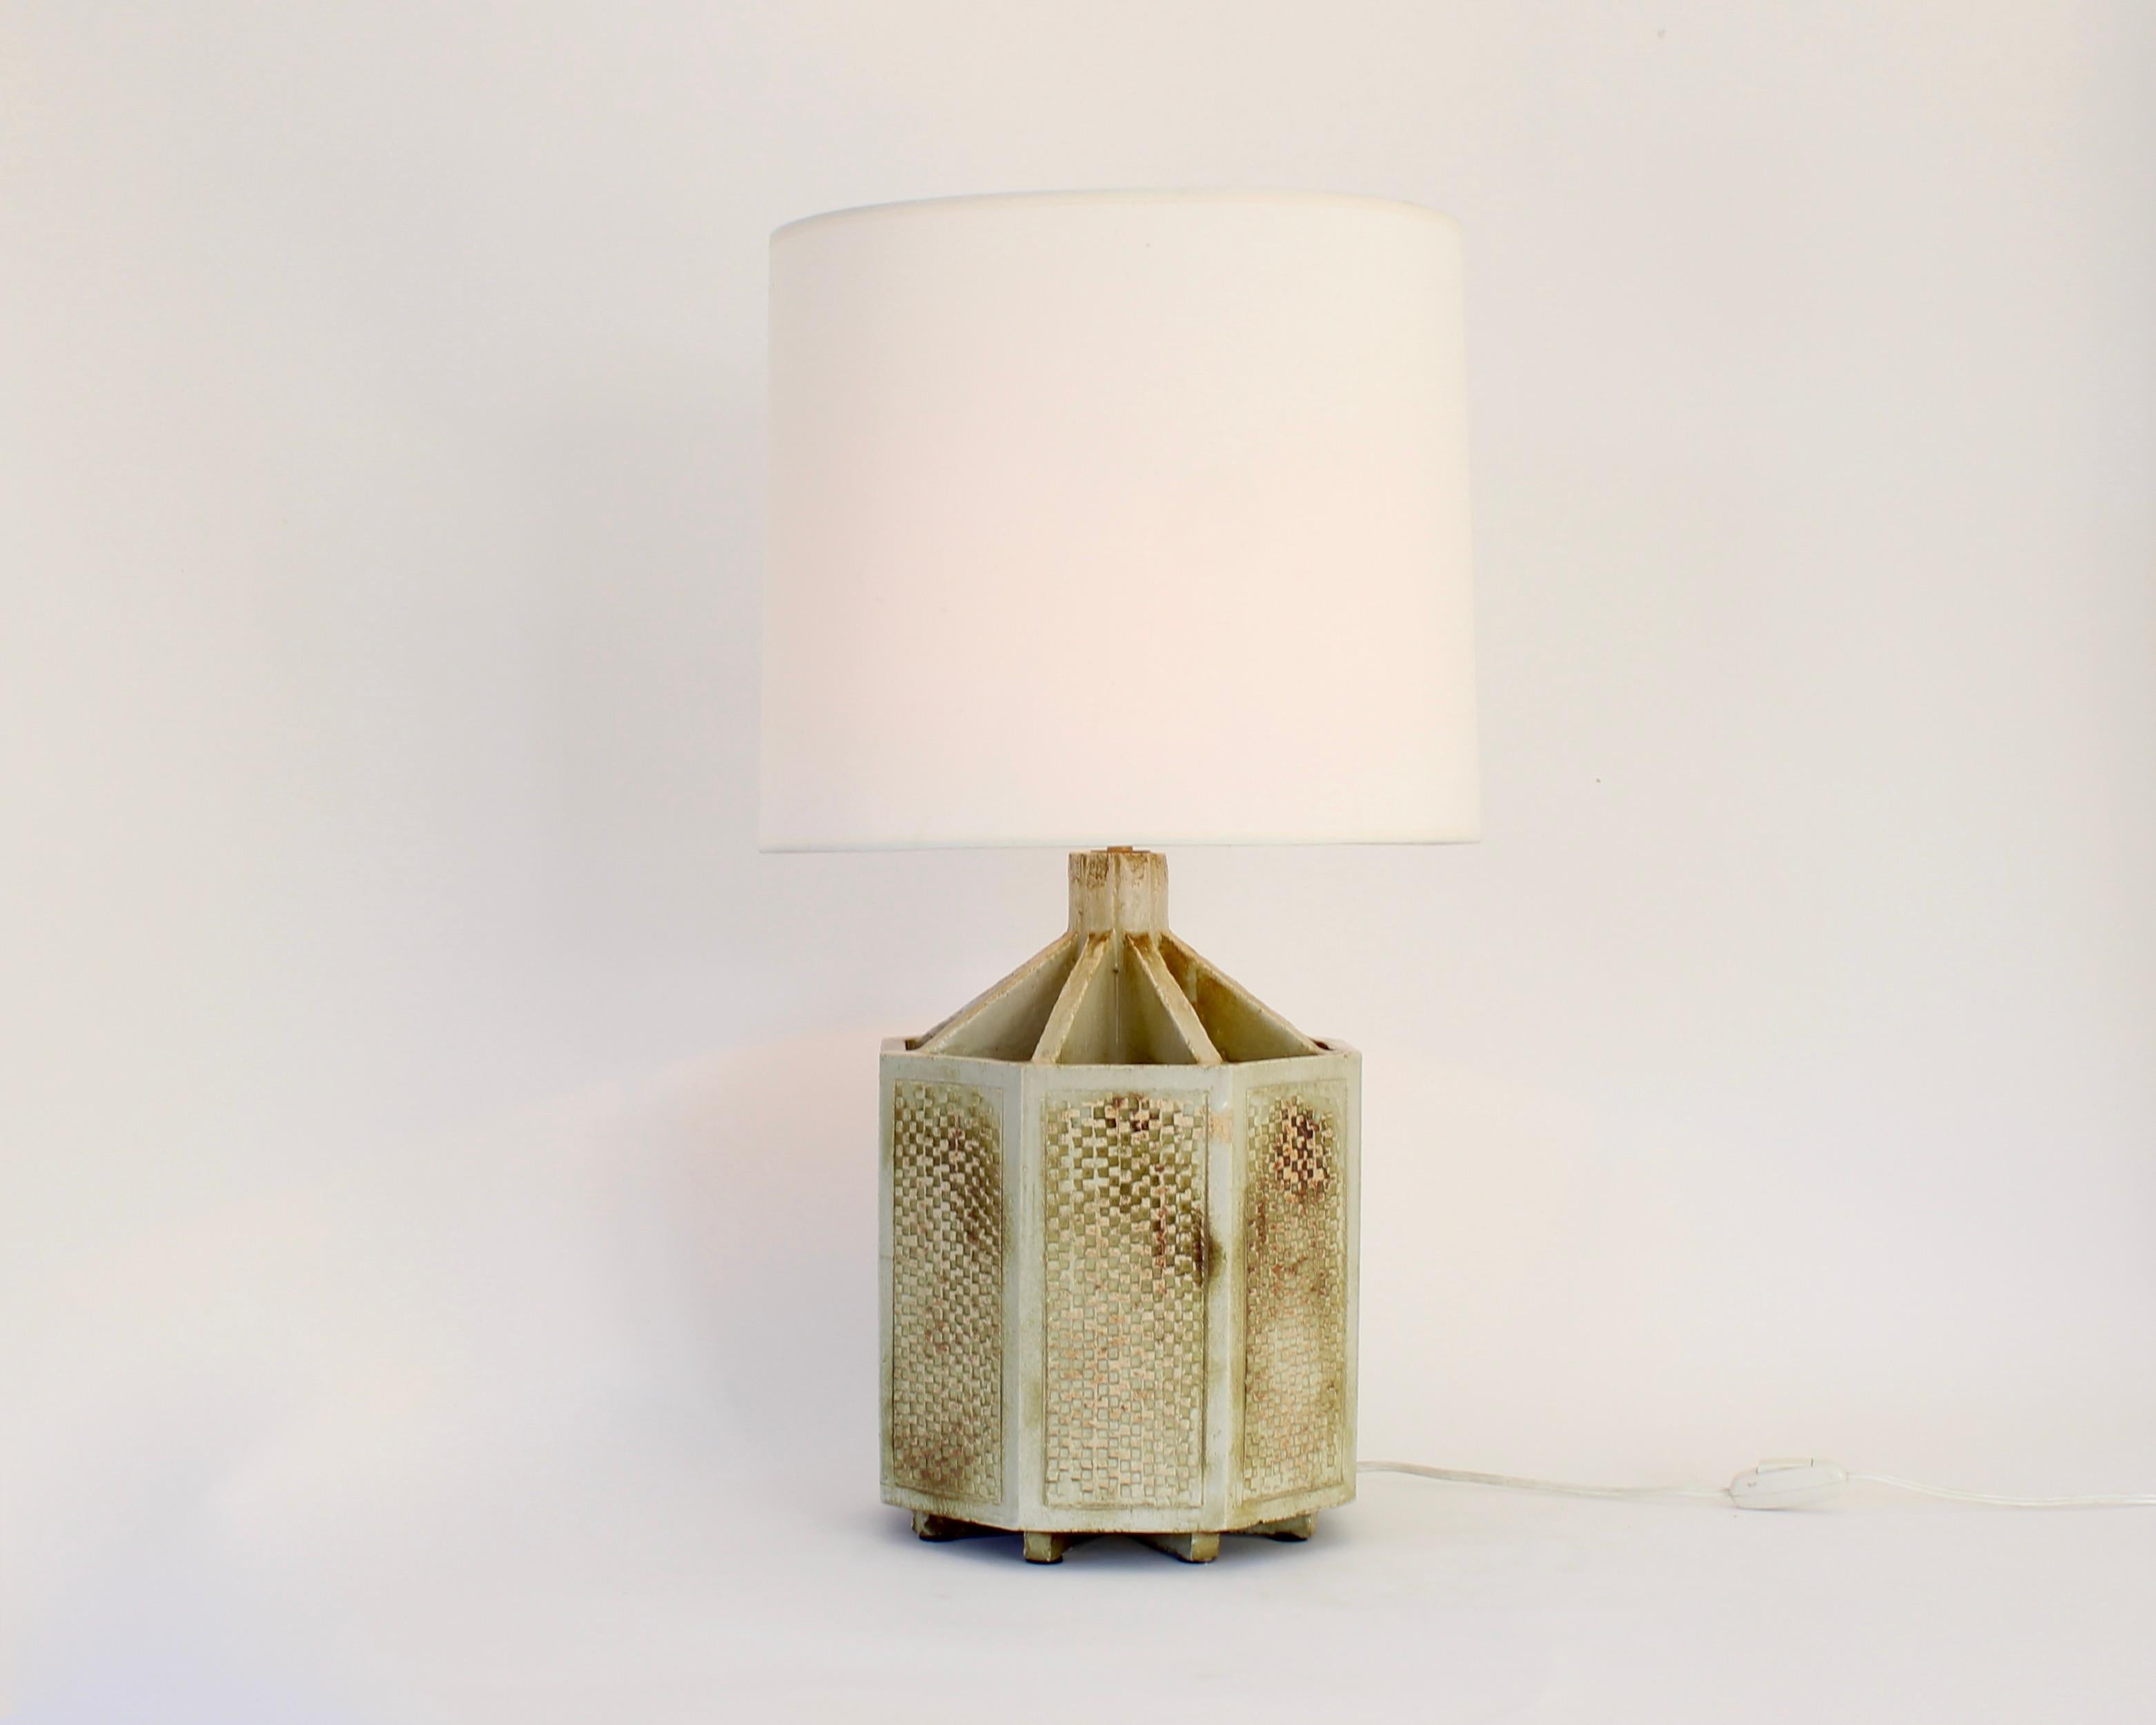 Roger Capron French ceramic table lamp in octagon form with cream, gray ochre glaze and incised decoration. This form is rare and with an abstract decoration incised in the clay without Capron typical figurative or floral motifs. 
Not many of these